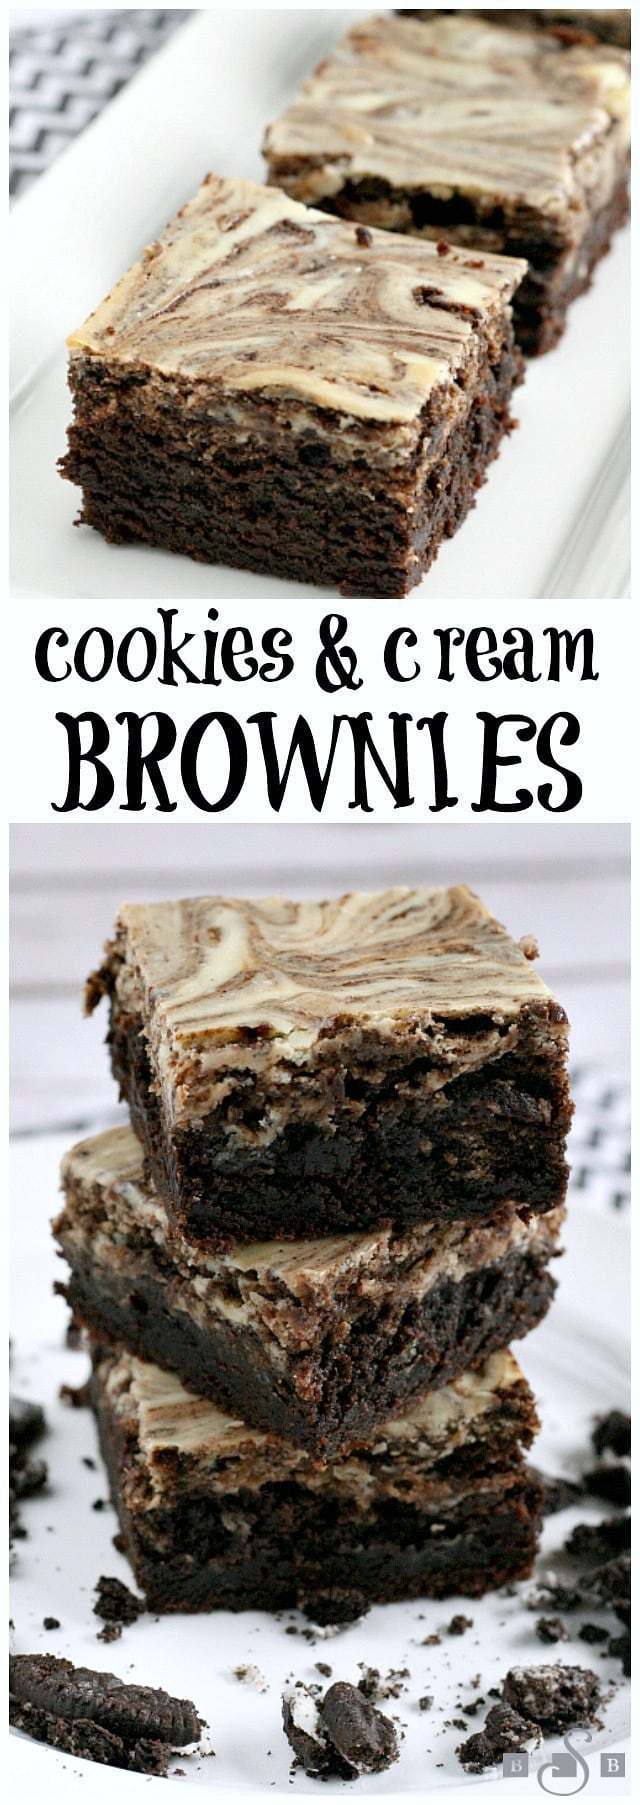 These Cookies & Cream Brownies are the perfect combination of cream cheese, brownies, and Oreo Cookies! Warning: you may want to eat the whole pan yourself!